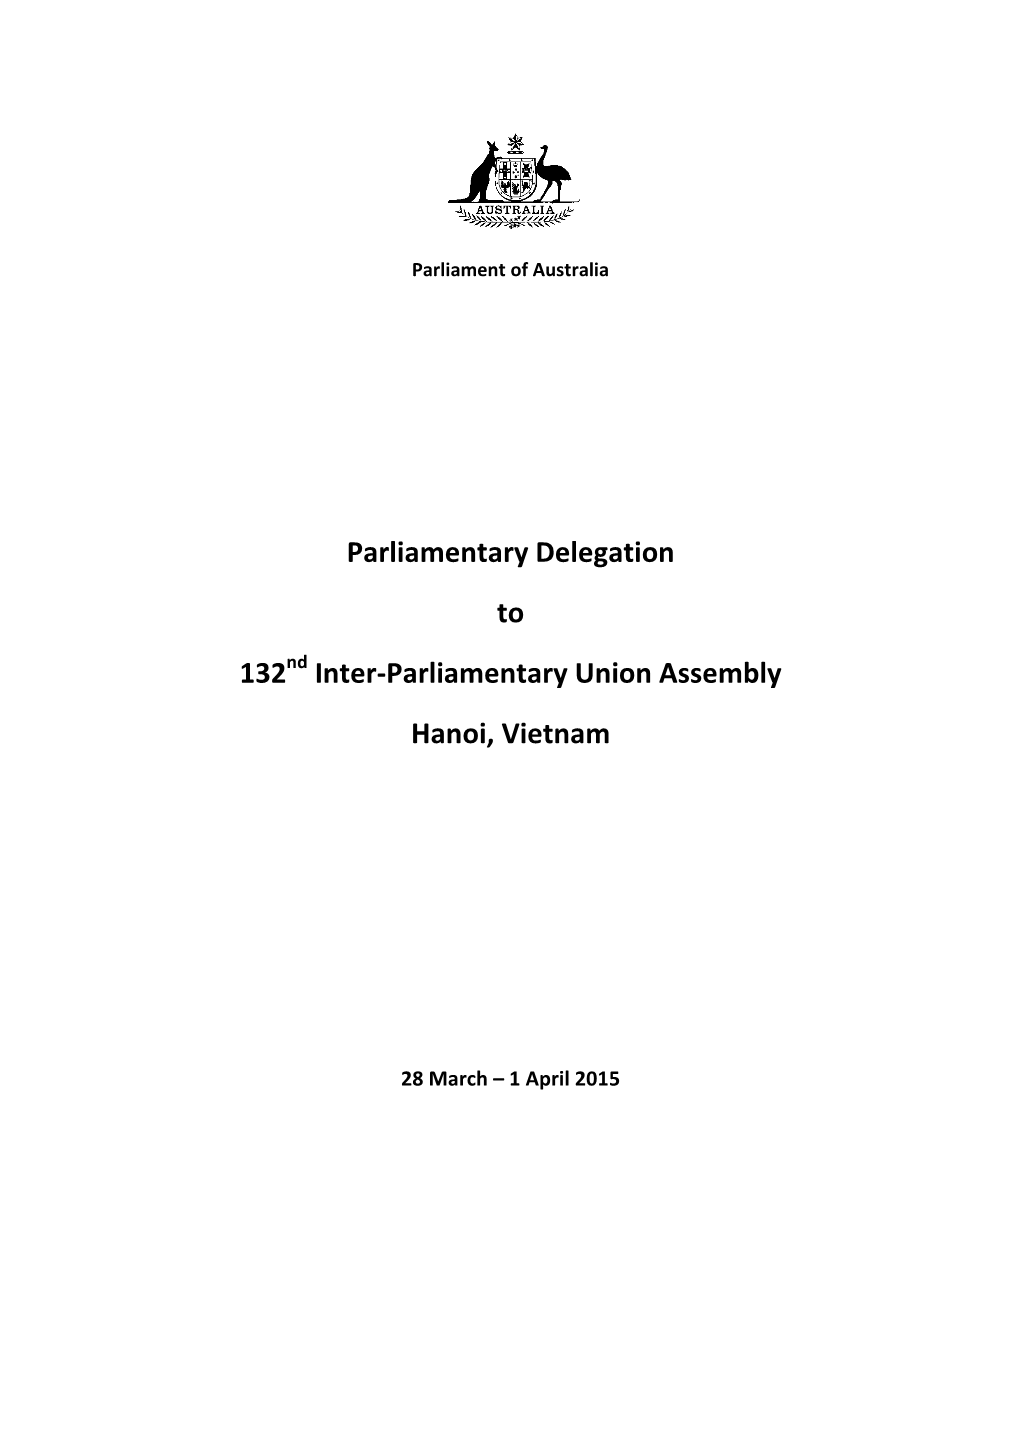 Report on the Parliamentary Delegation